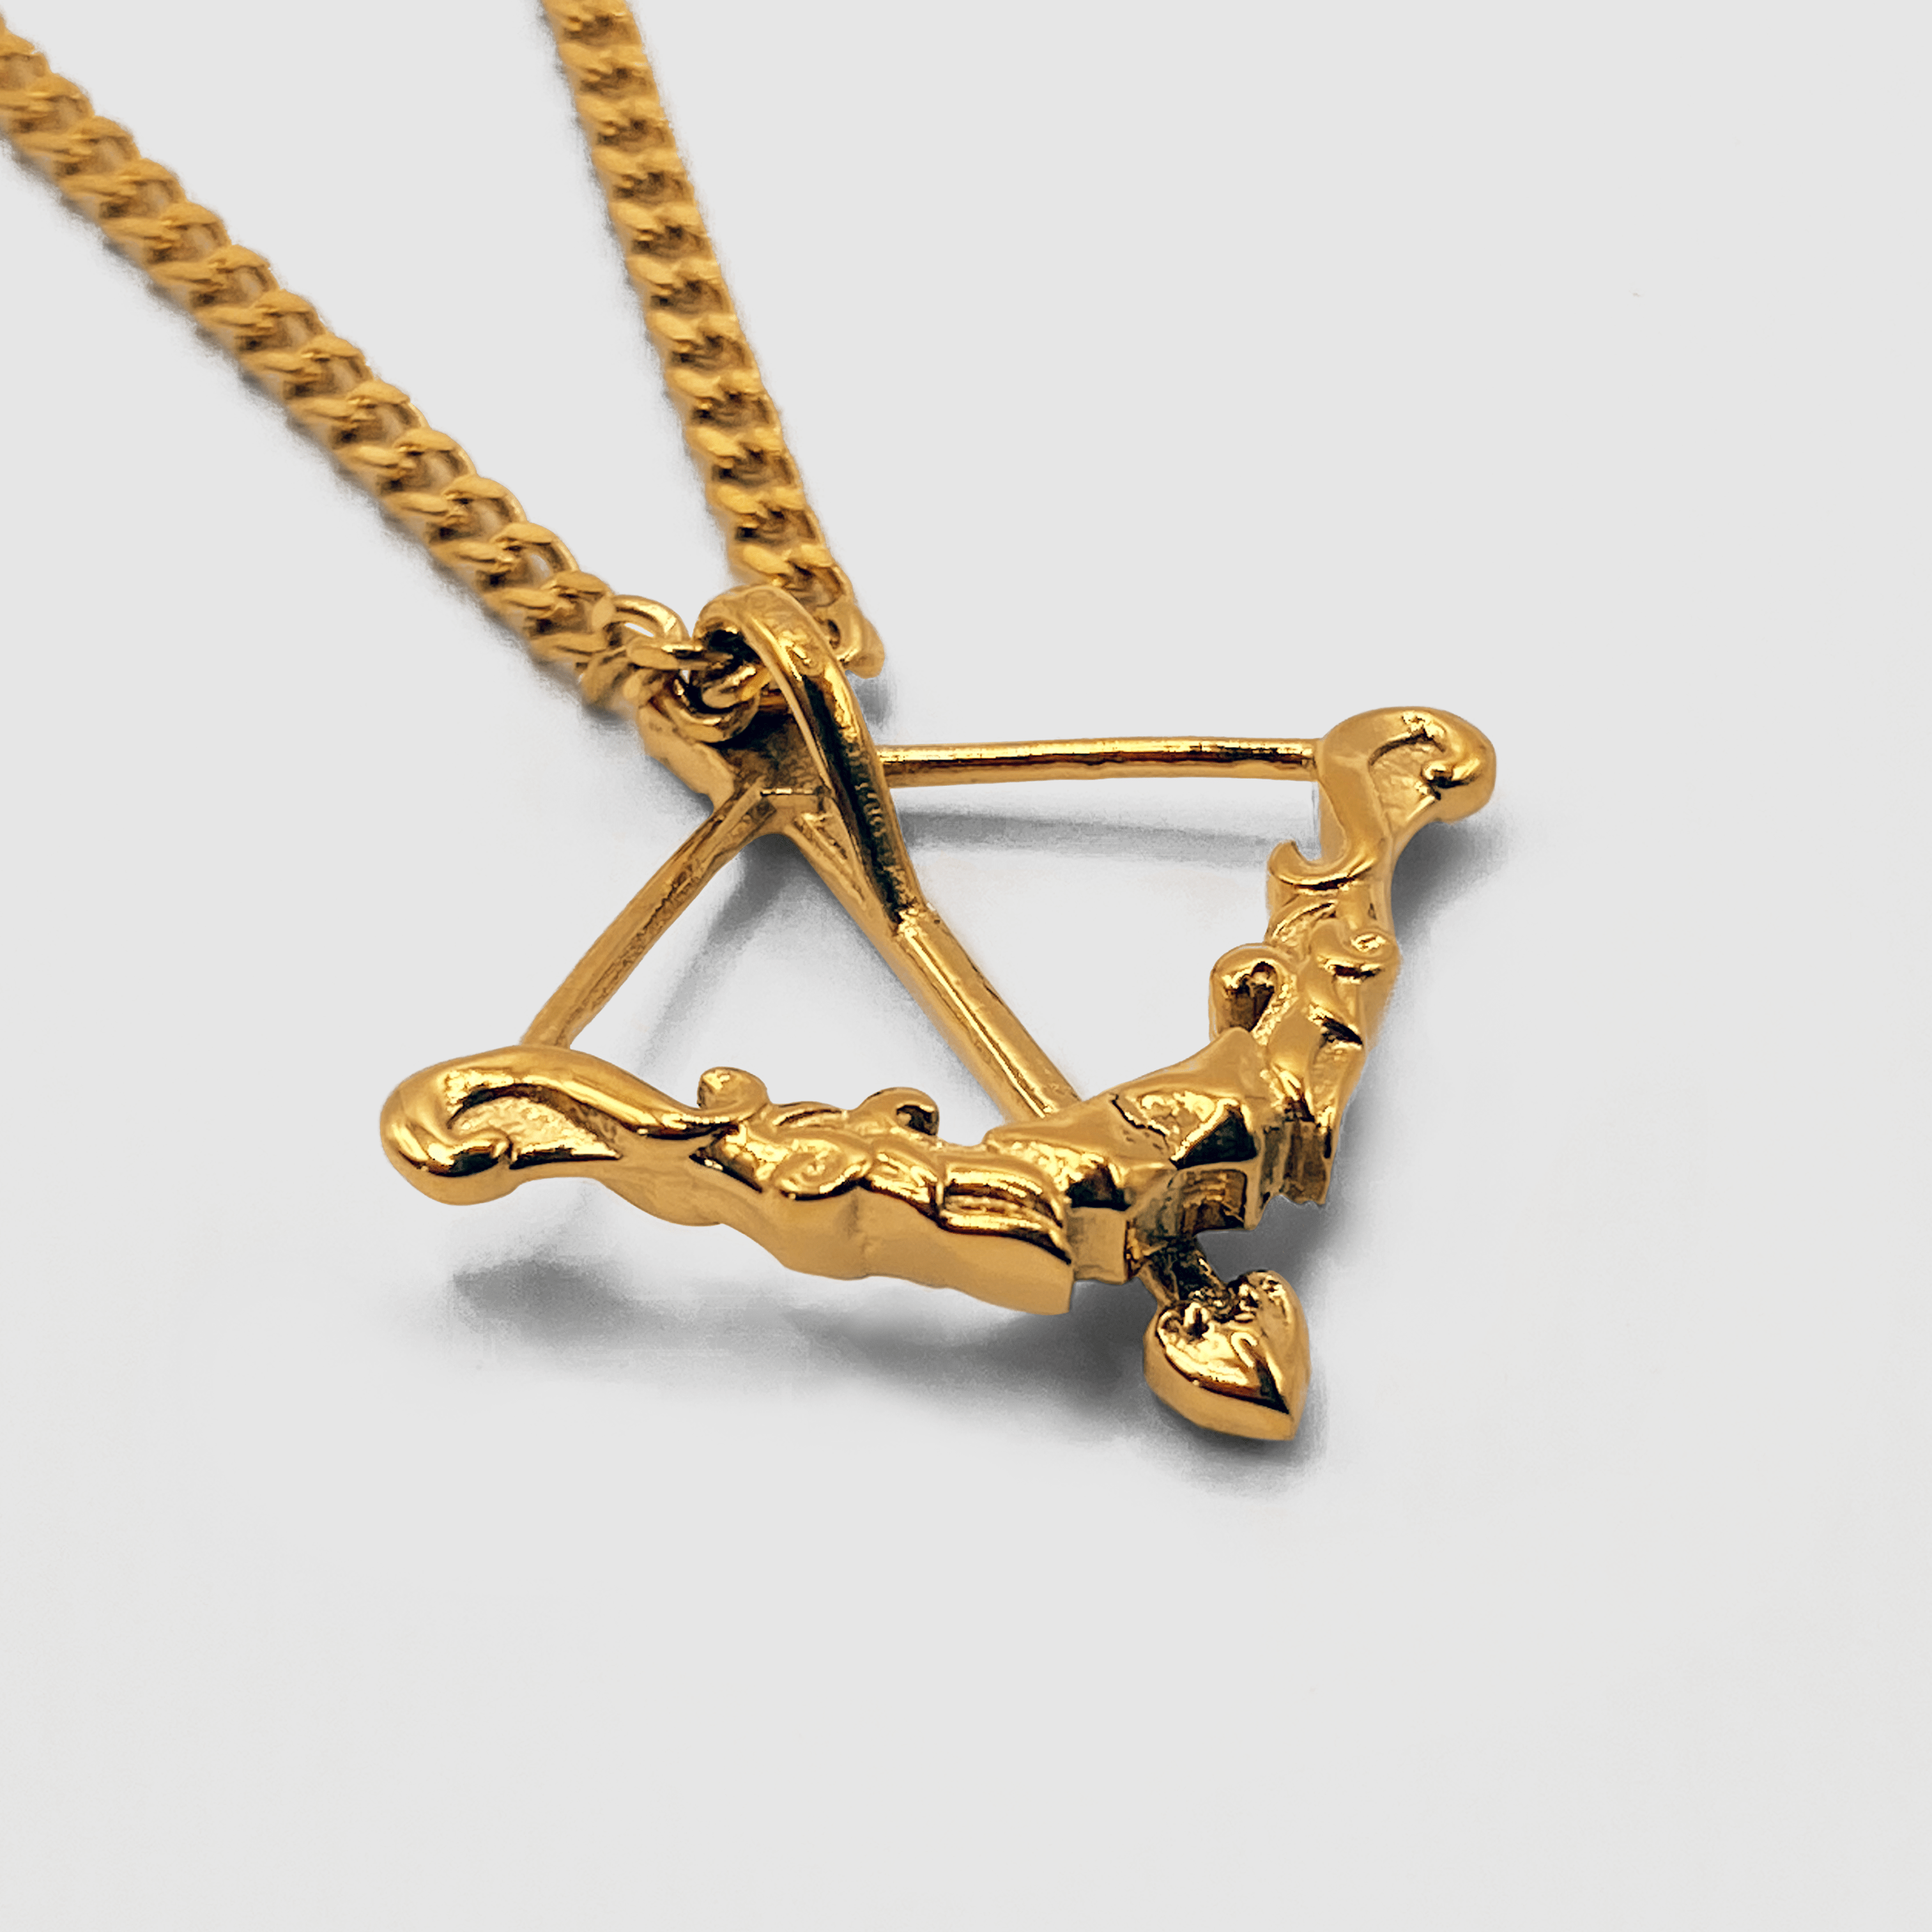 Gold Crossbow Pendant Necklace